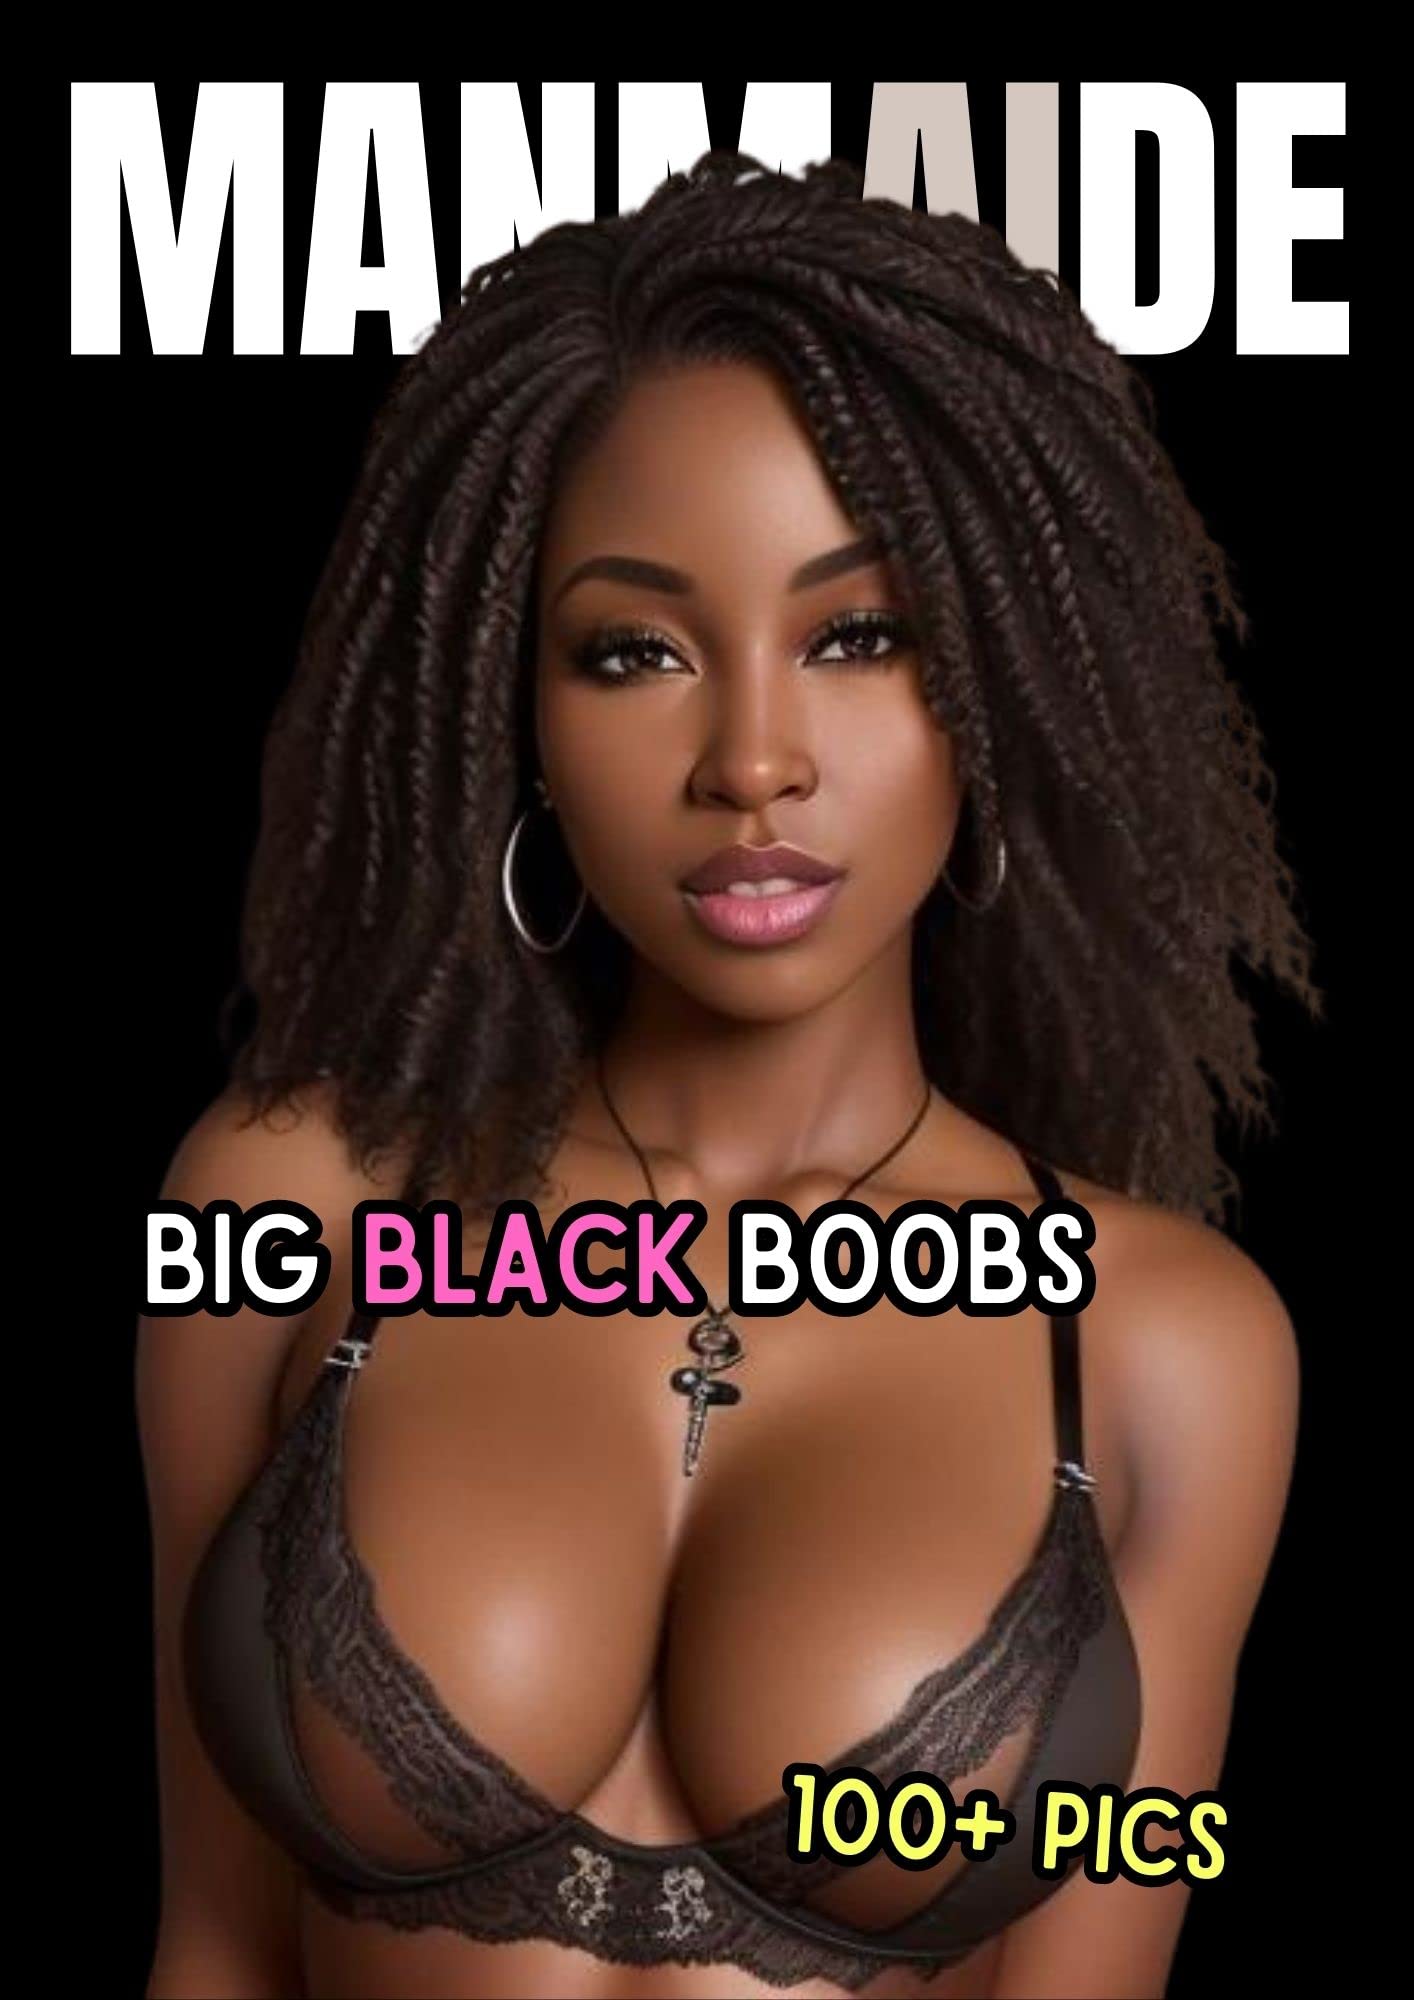 annie champagne recommends sexy black teen boobs pic